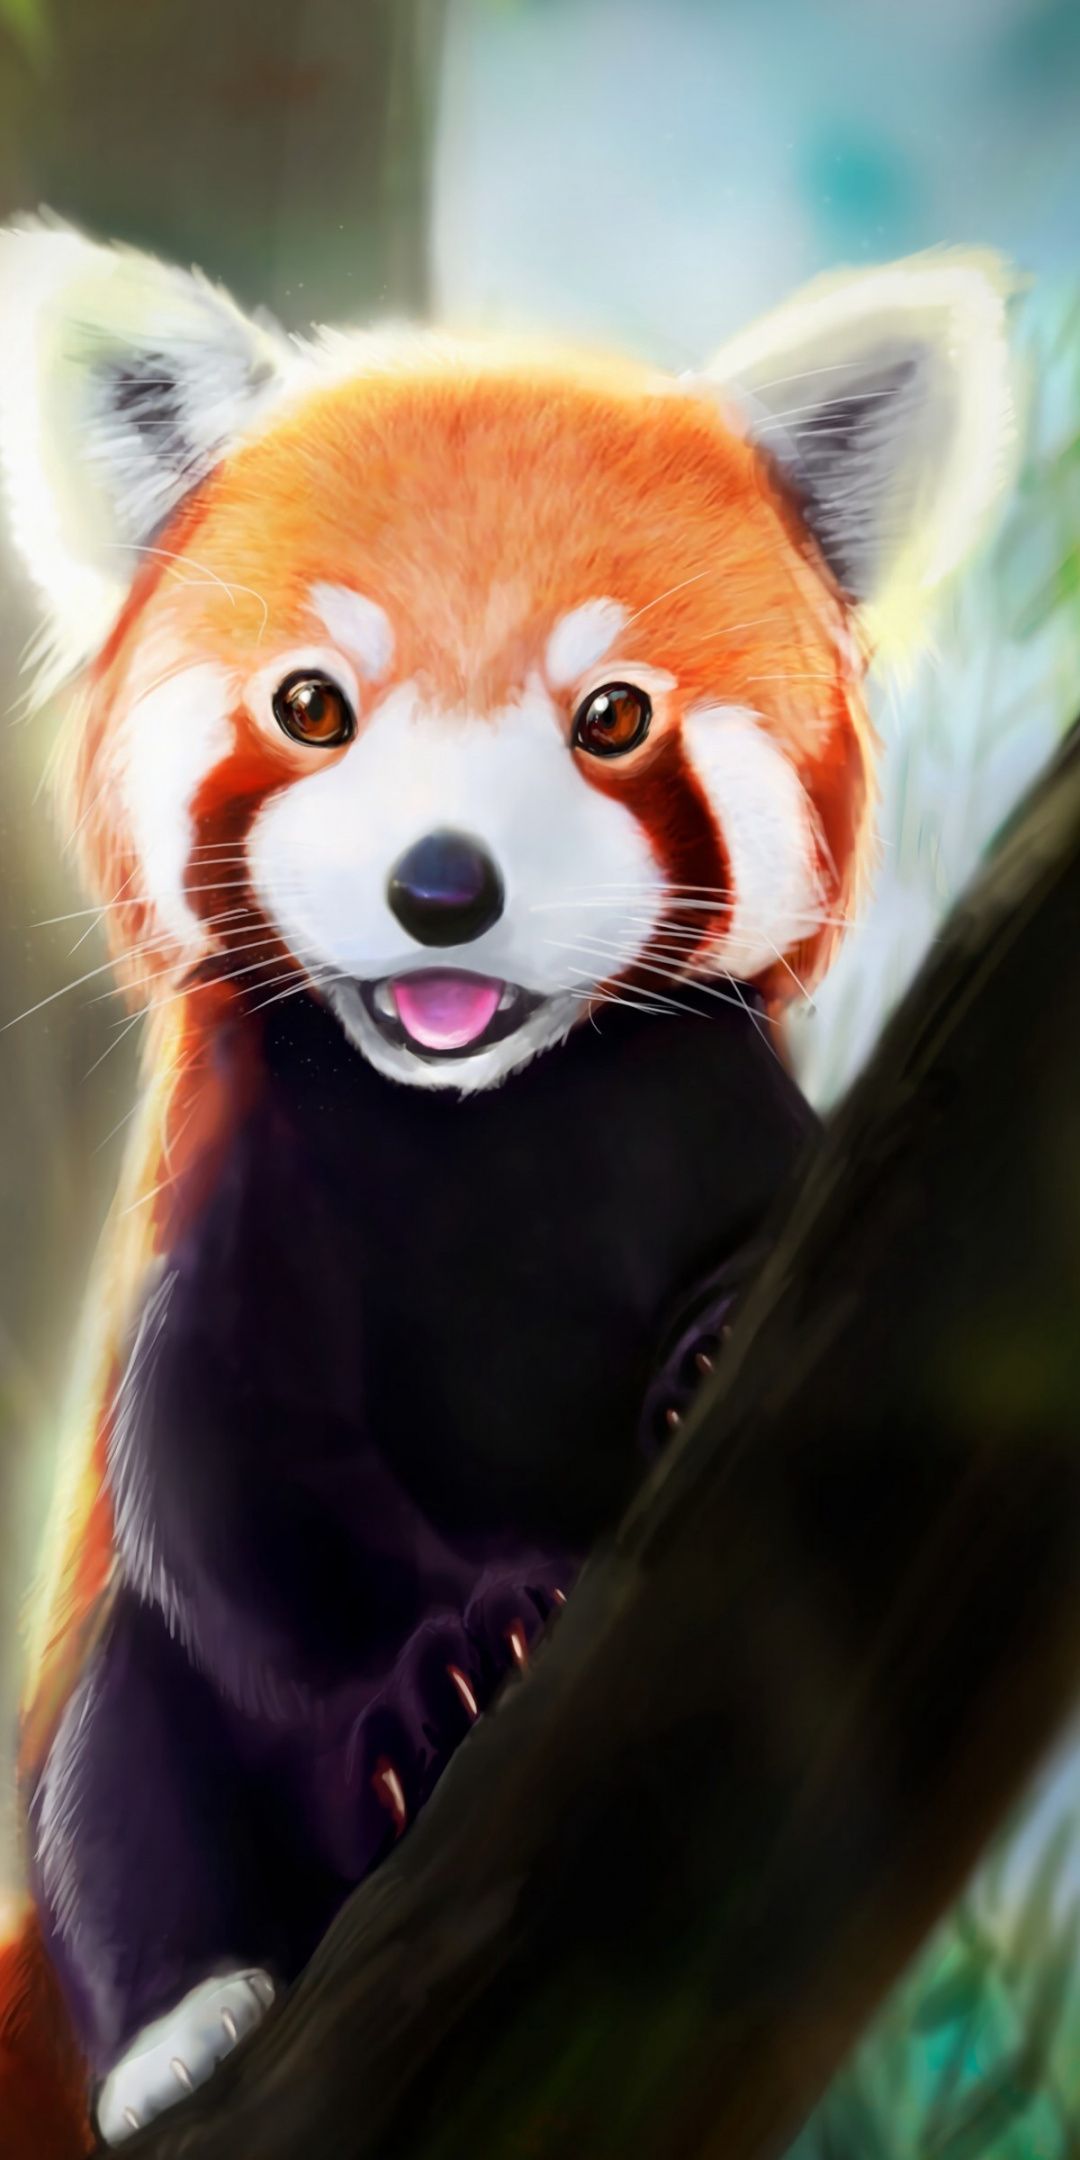 294056 Red Panda Giant Panda Painting Terrestrial Animal Snout Apple  iPhone X hd download 1125x2436  Rare Gallery HD Wallpapers